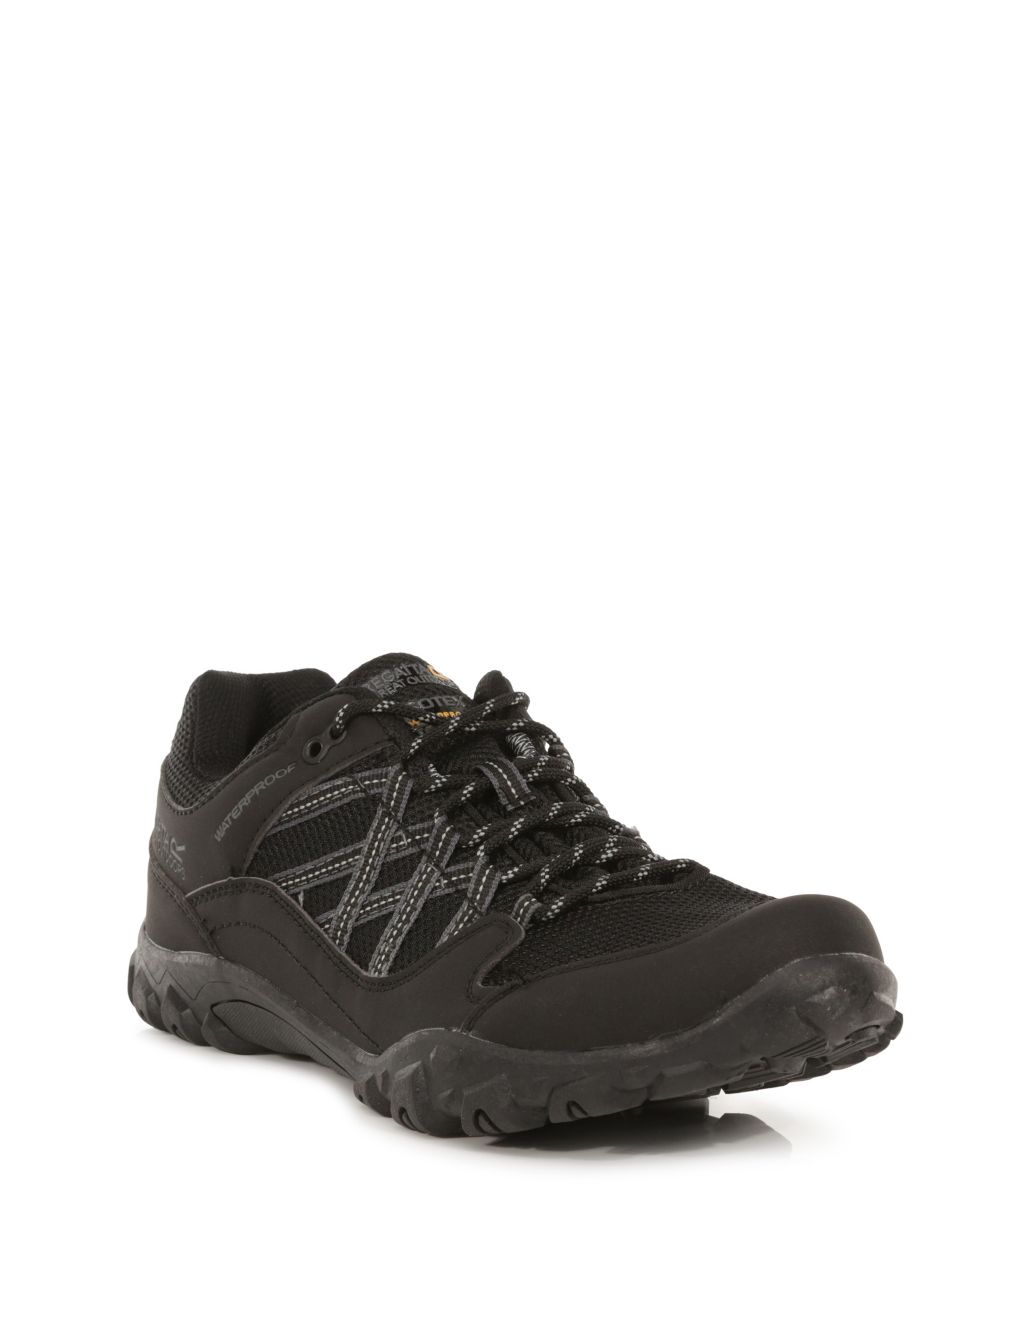 Edgepoint III Water-Resistant Walking Shoes image 2